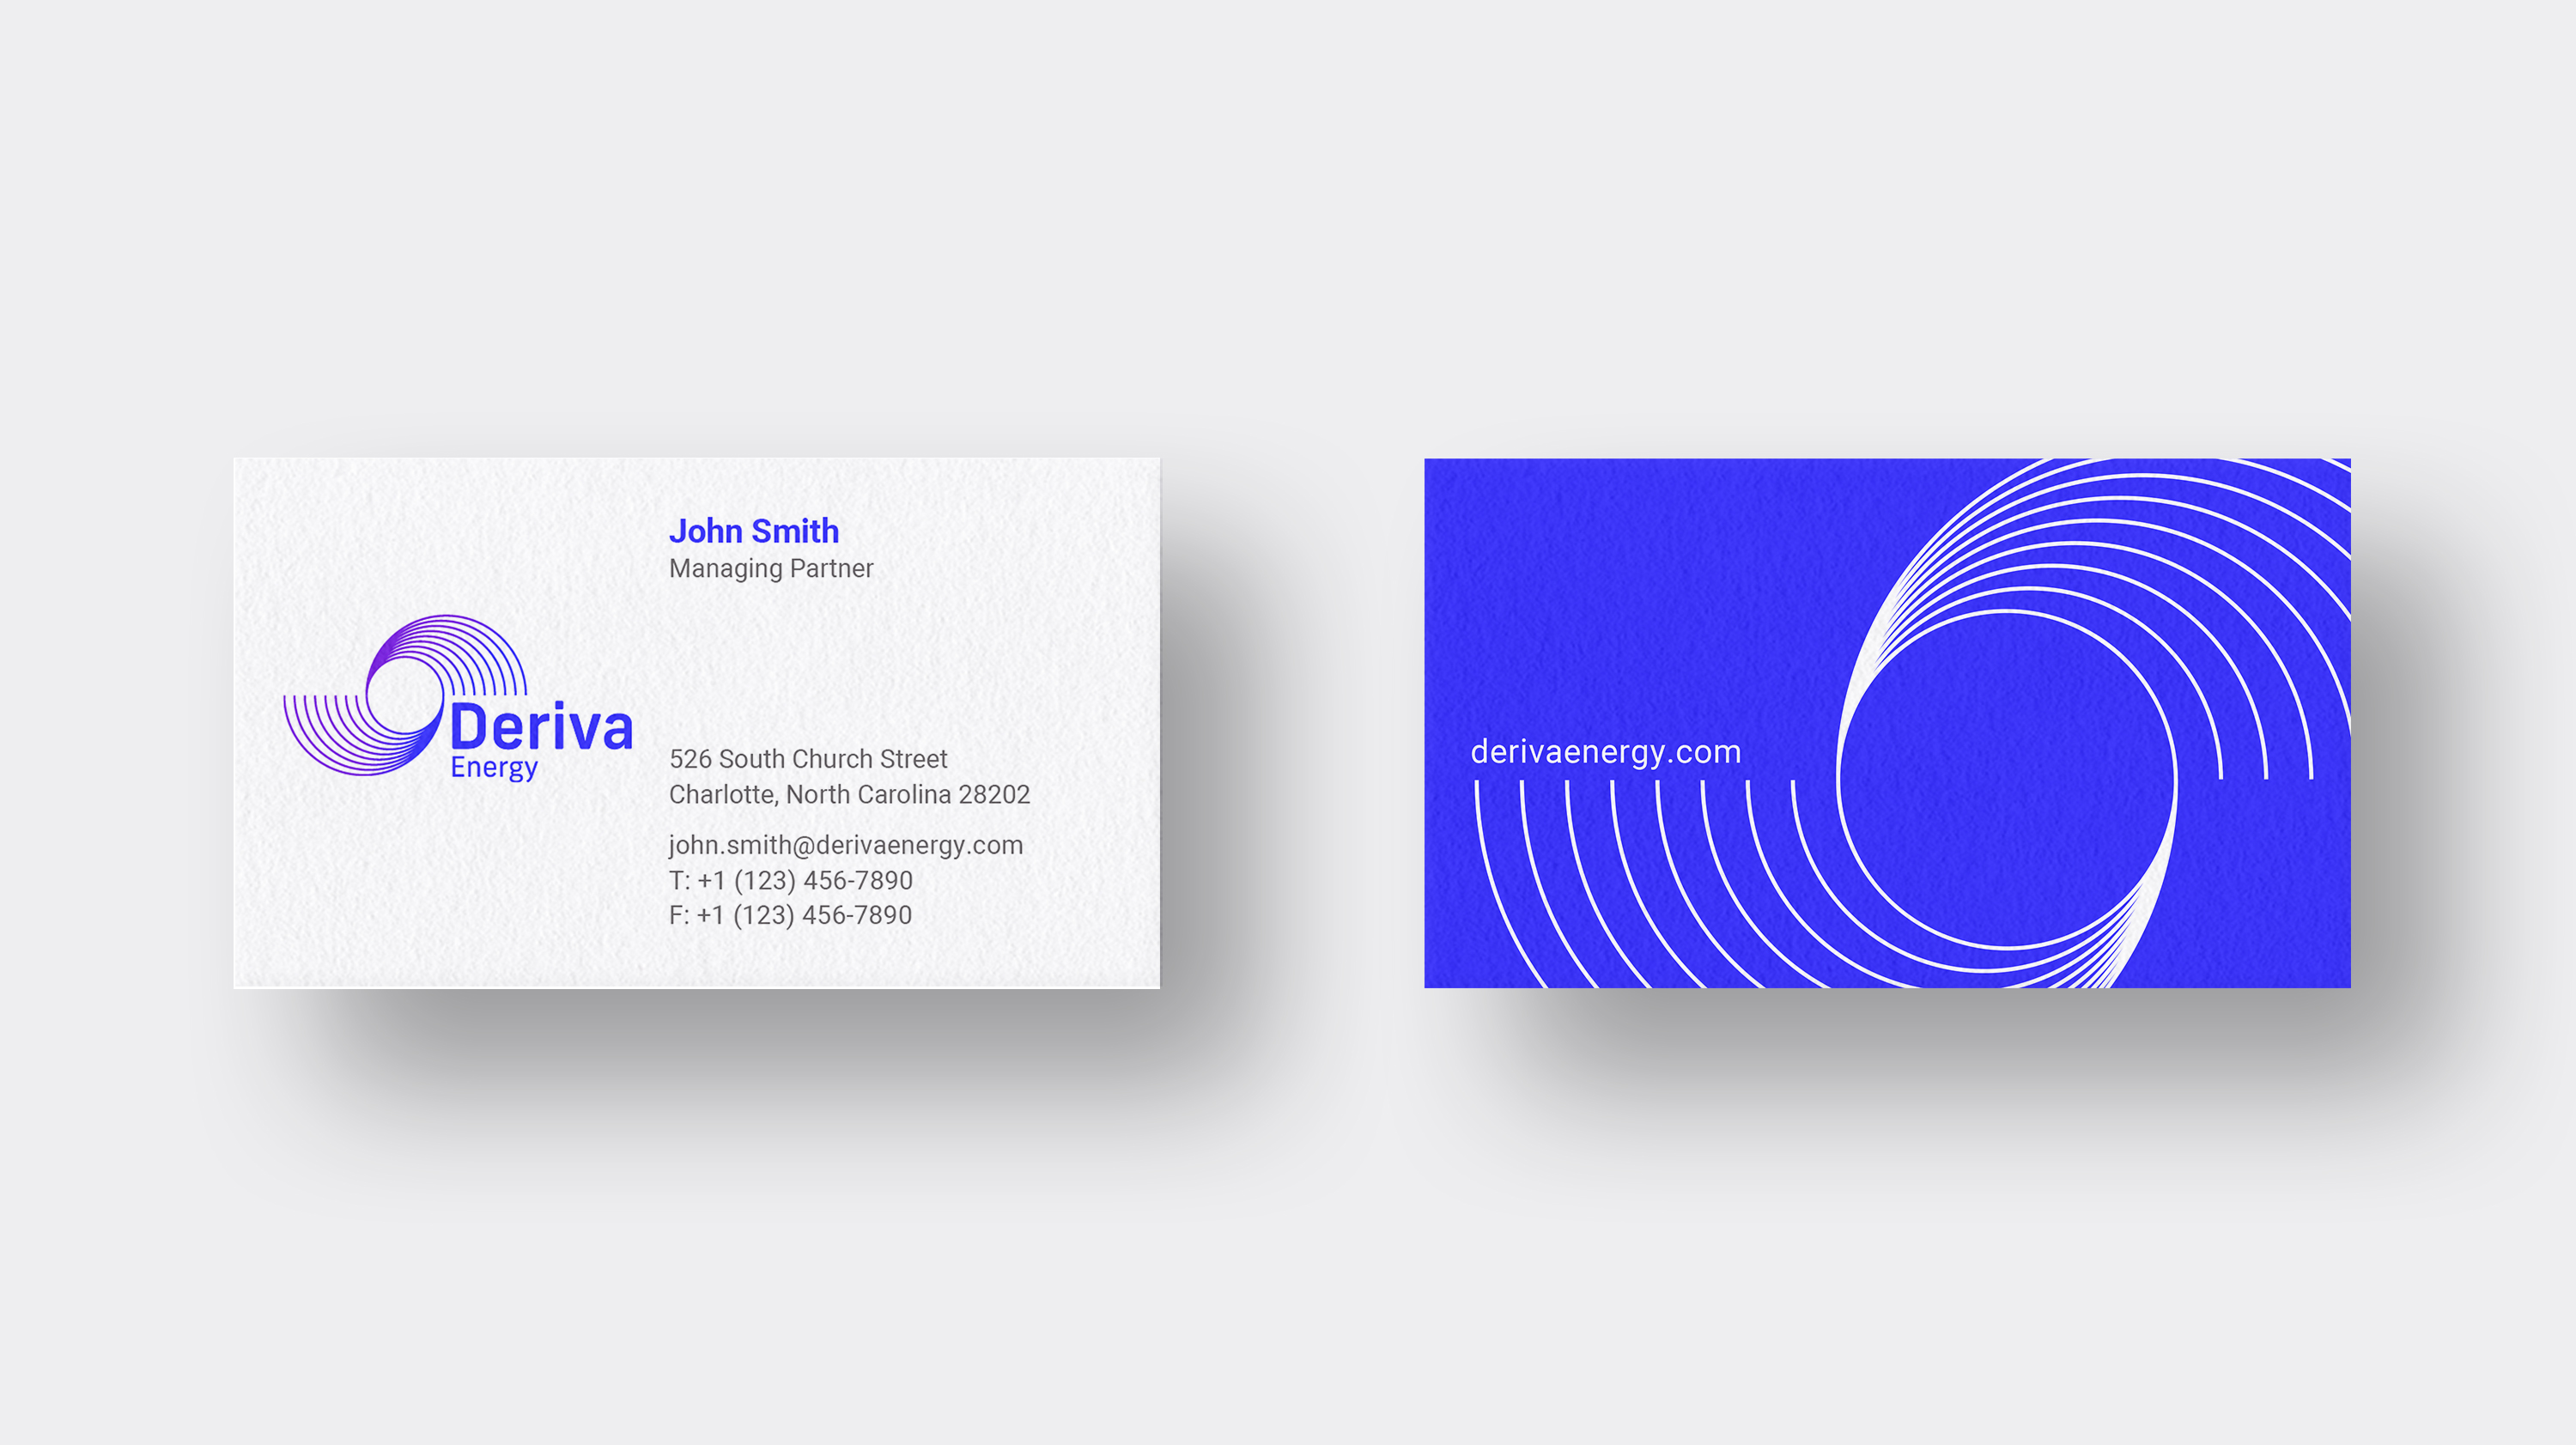 deriva business card with logo and employee information